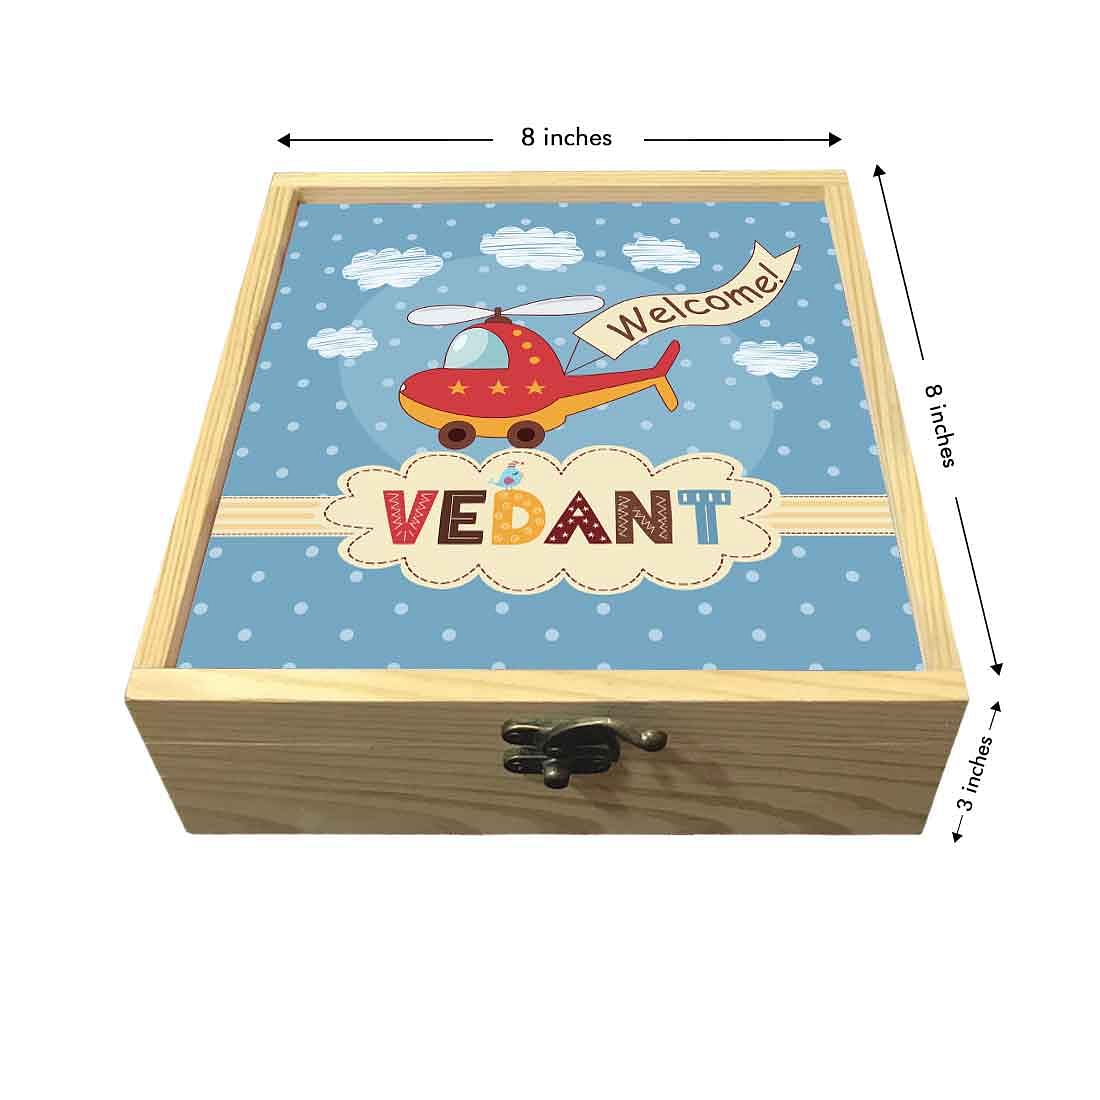 Childrens Personalized Jewellery Box - Helicopter & Clouds Nutcase